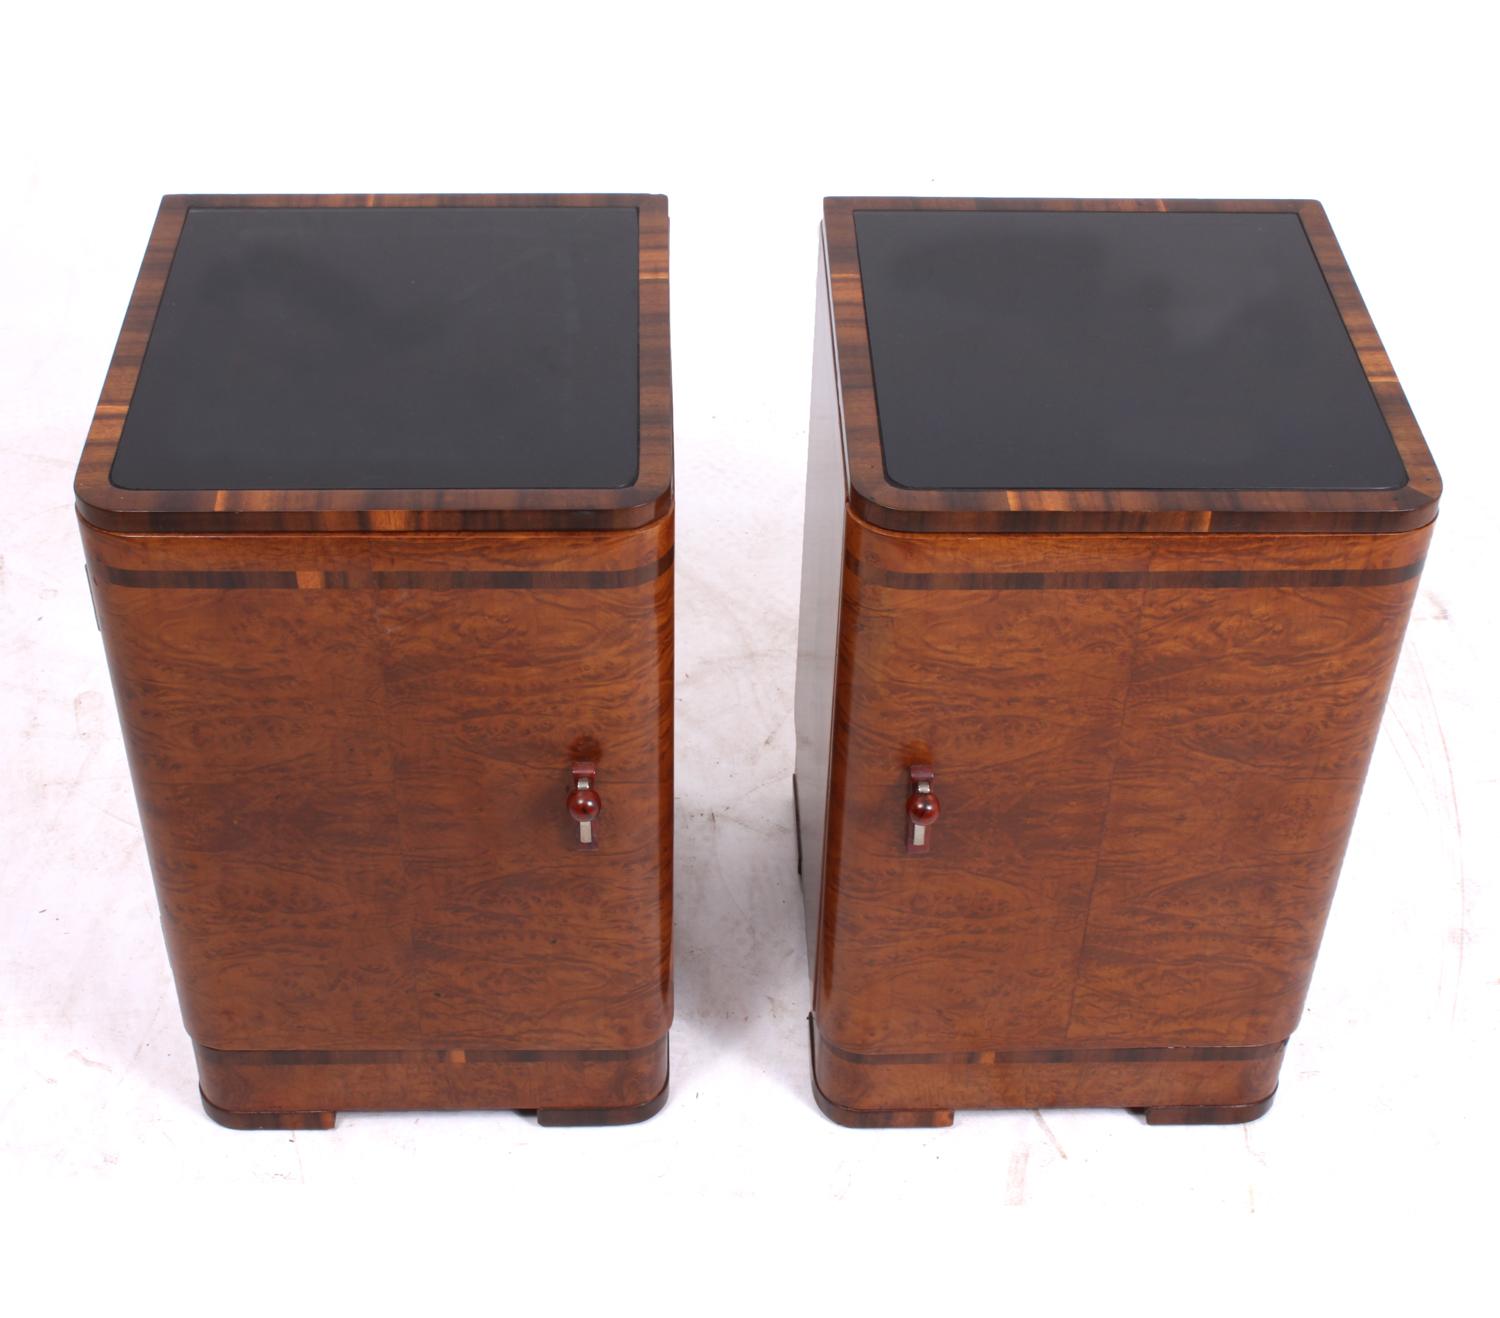 British Pair of Art Deco Bedside Cabinets in Burr Maple